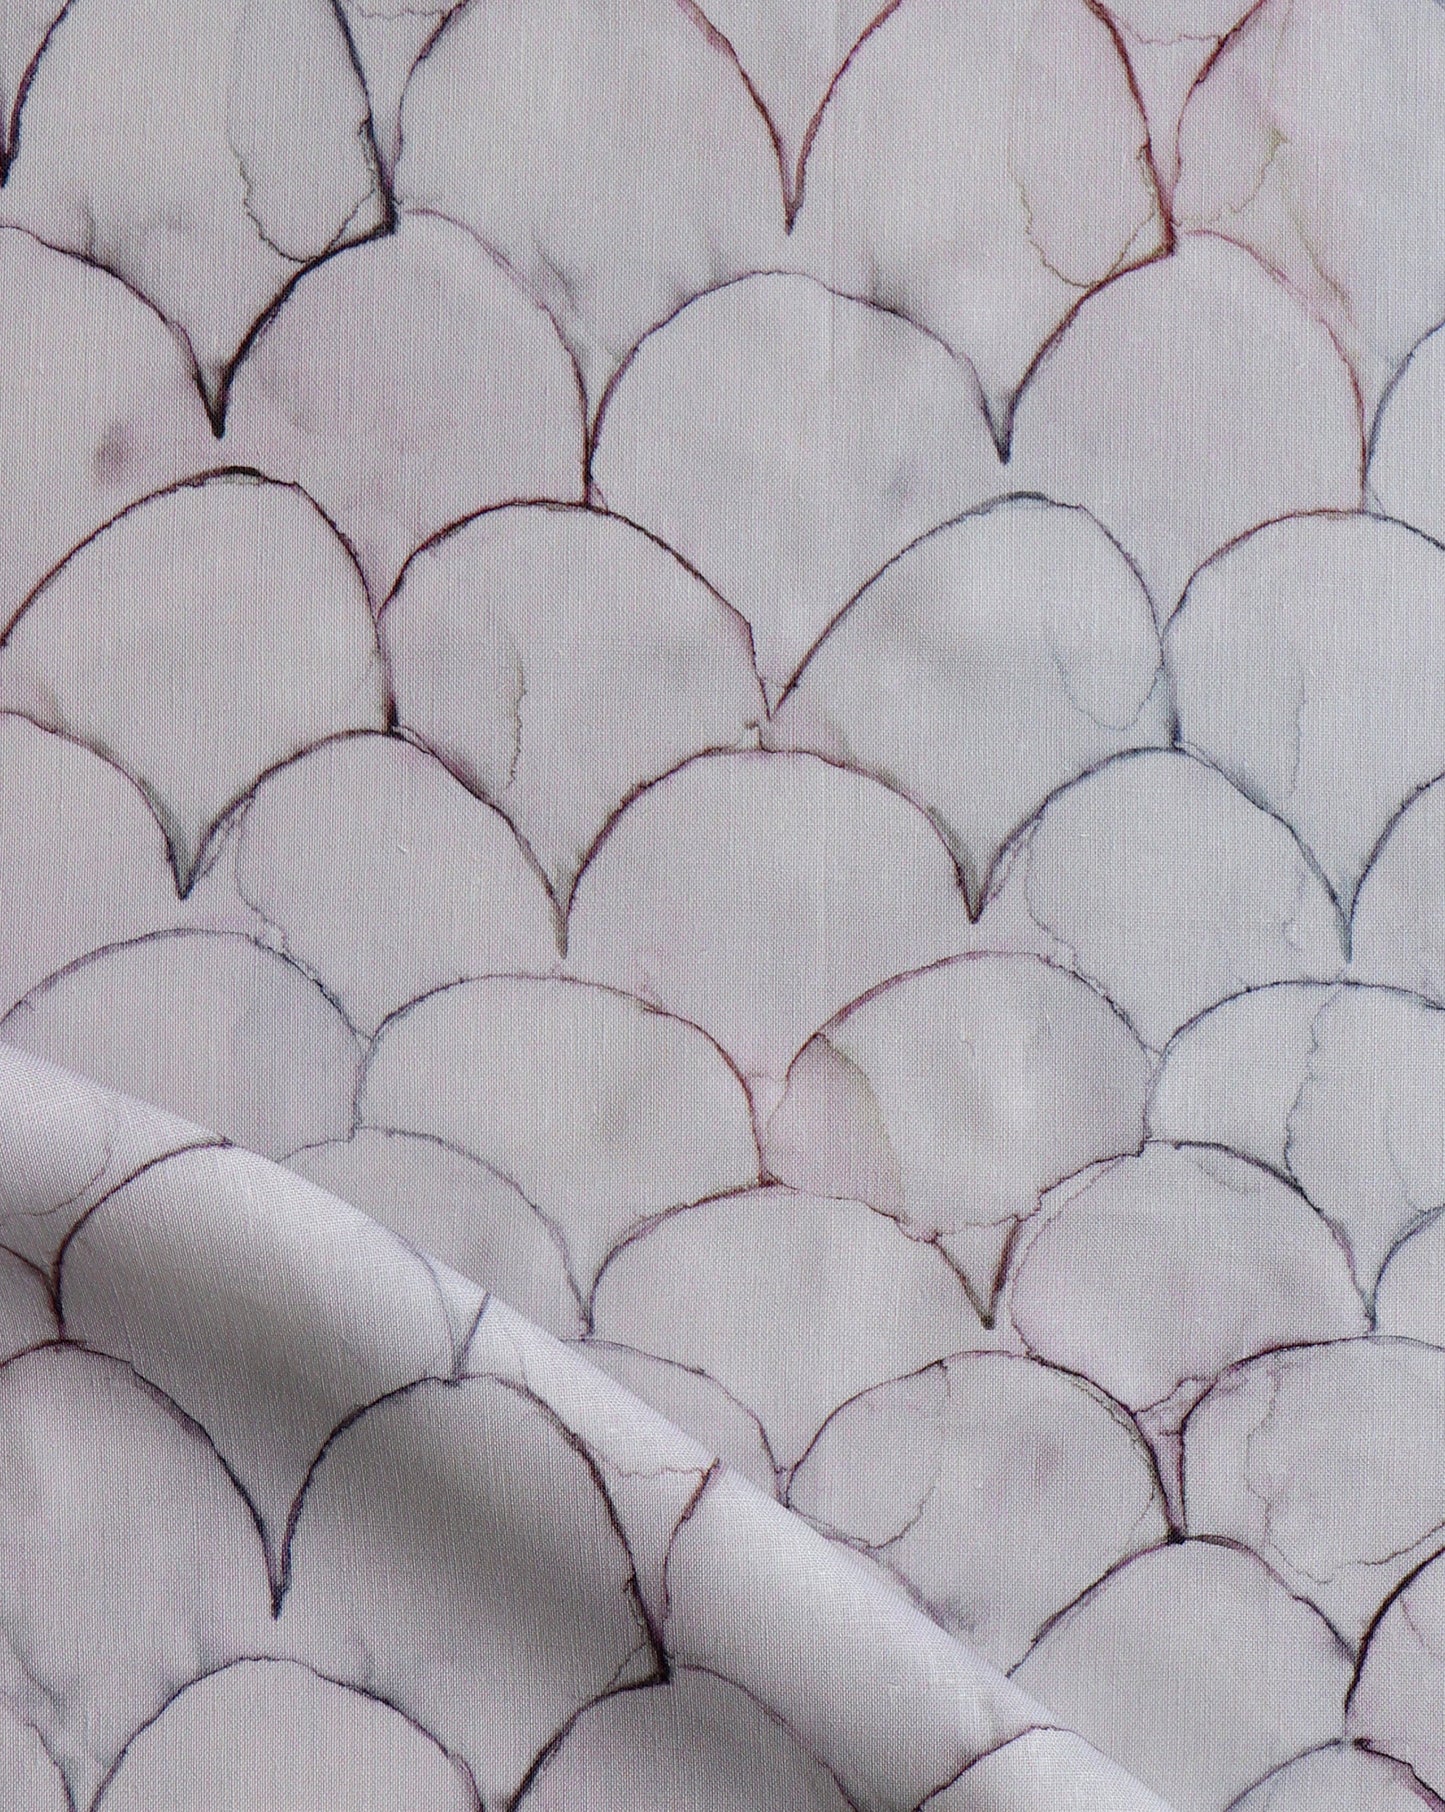 Baby Scallops fabric in Pomegranate introduces tones from mauve to blue into a geometric pattern of overlapping curves